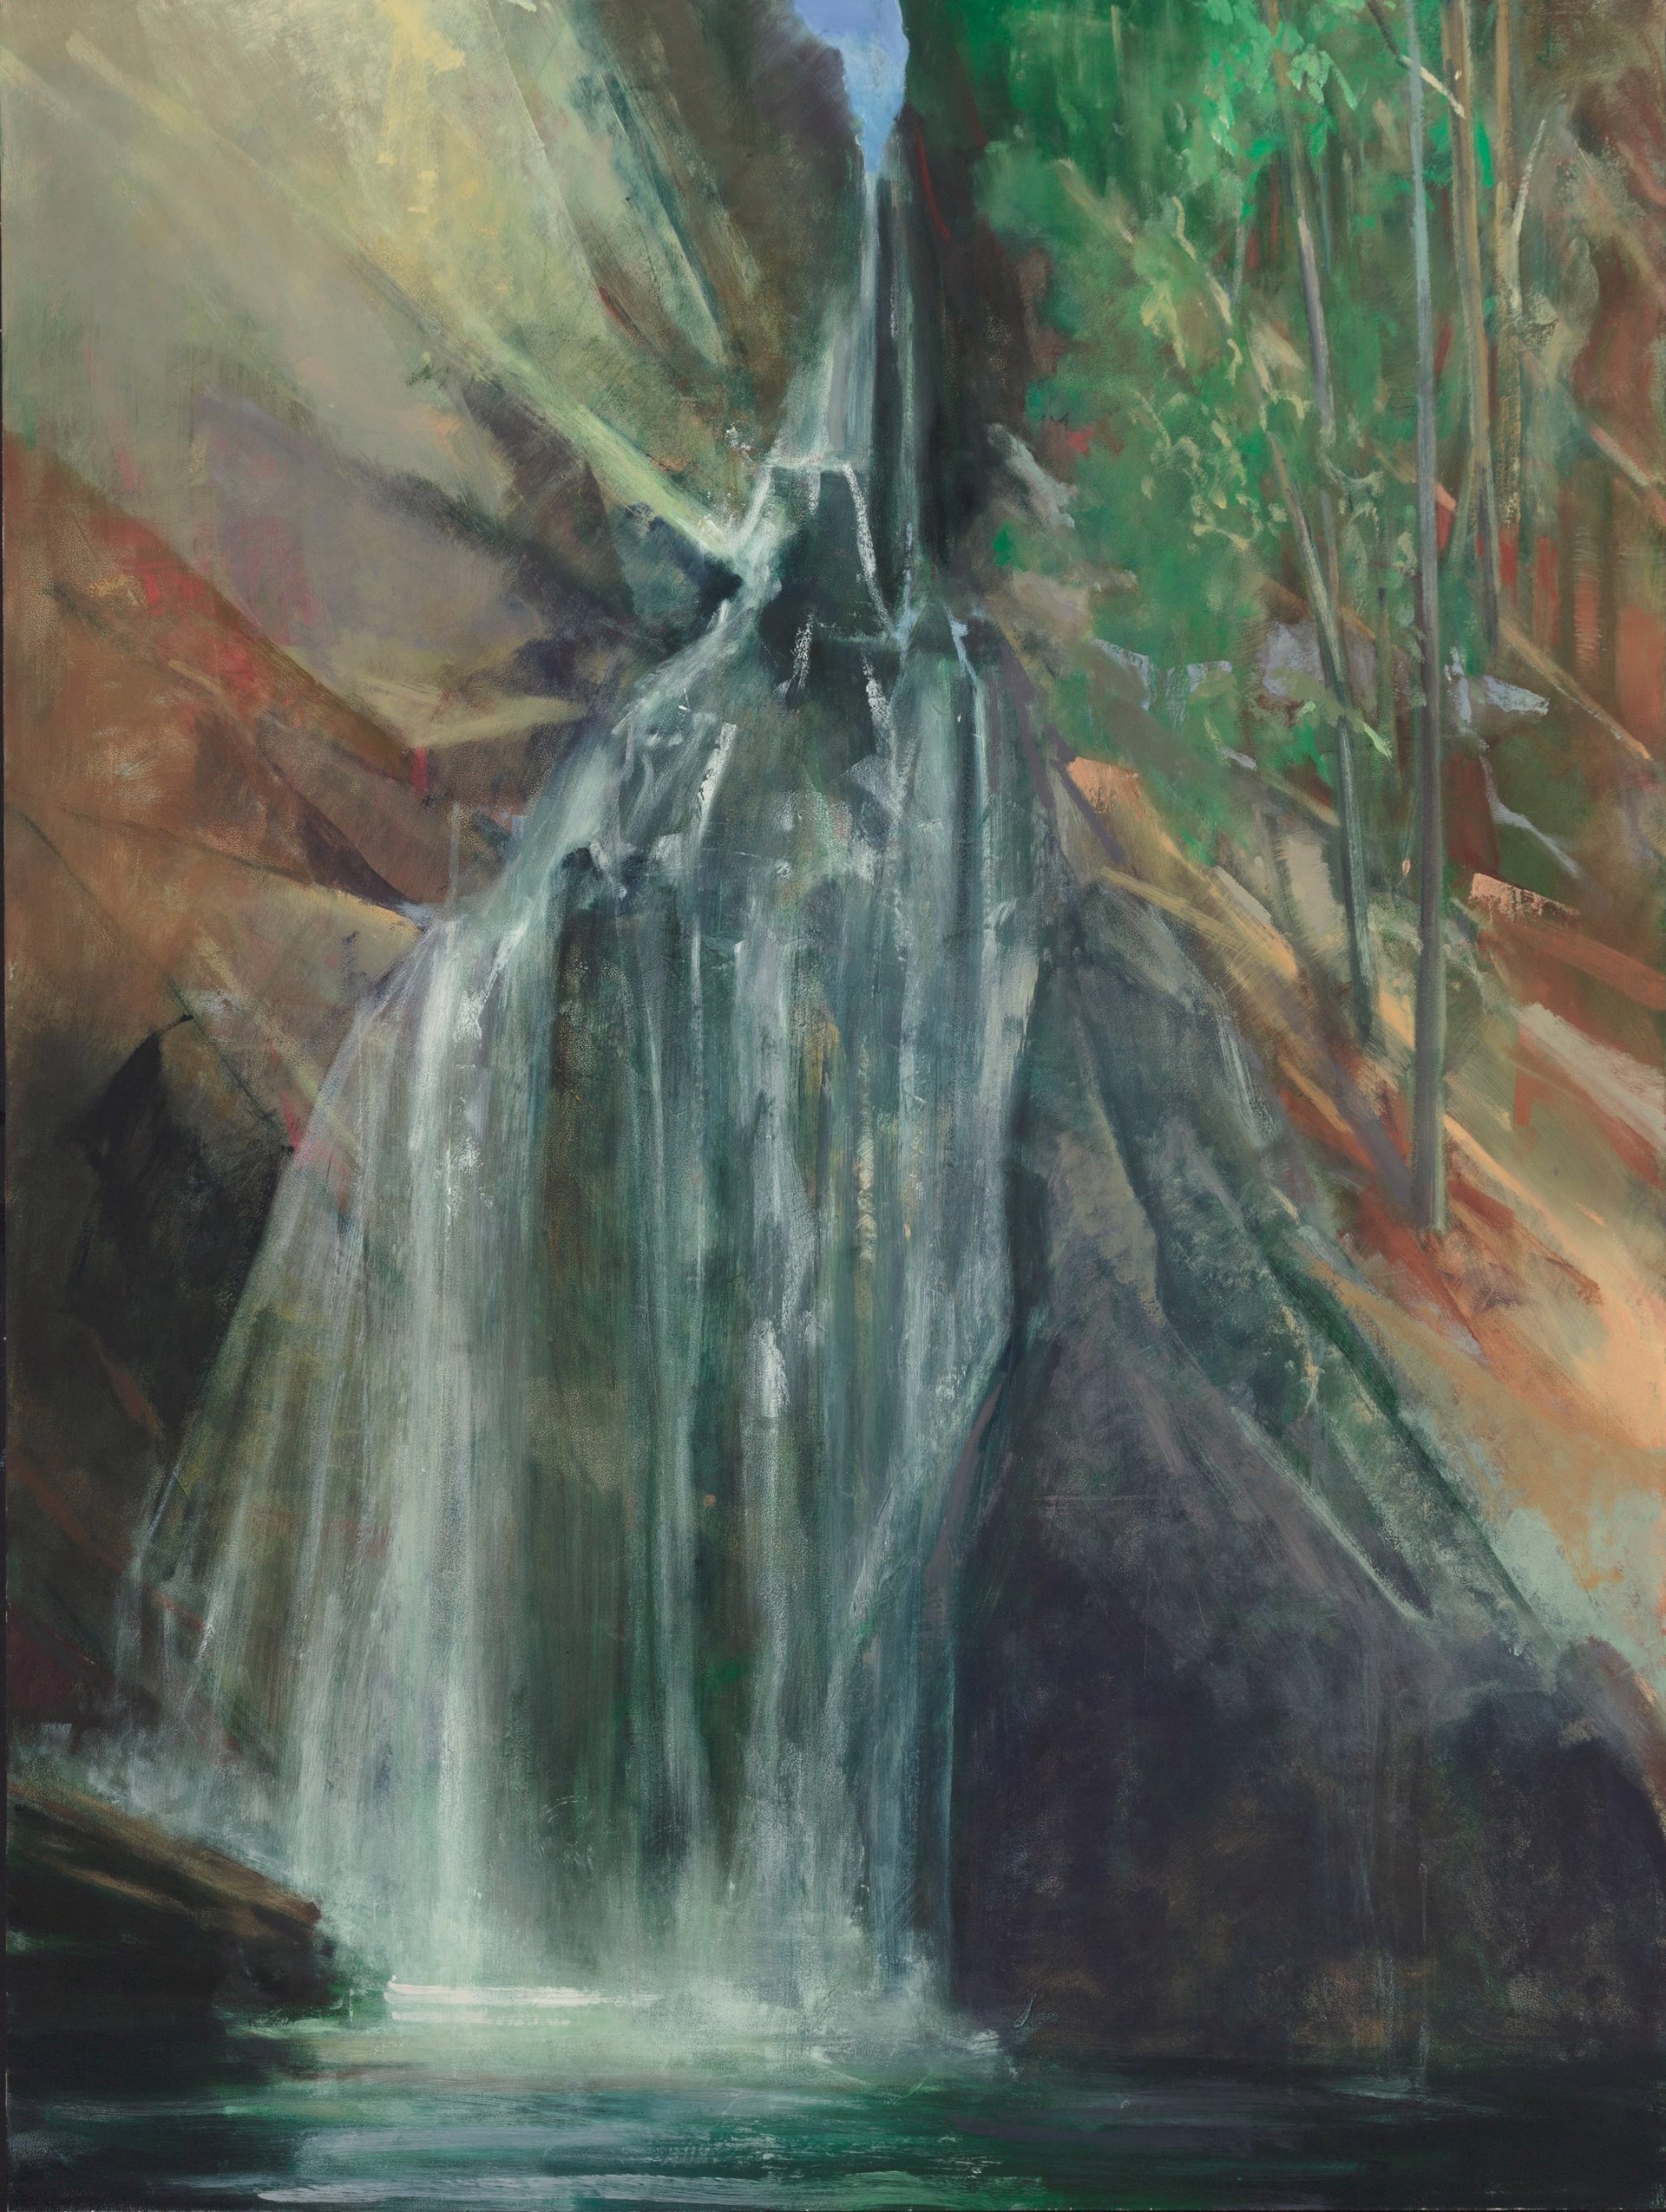 High Falls #2, 2014 by Donald Beal